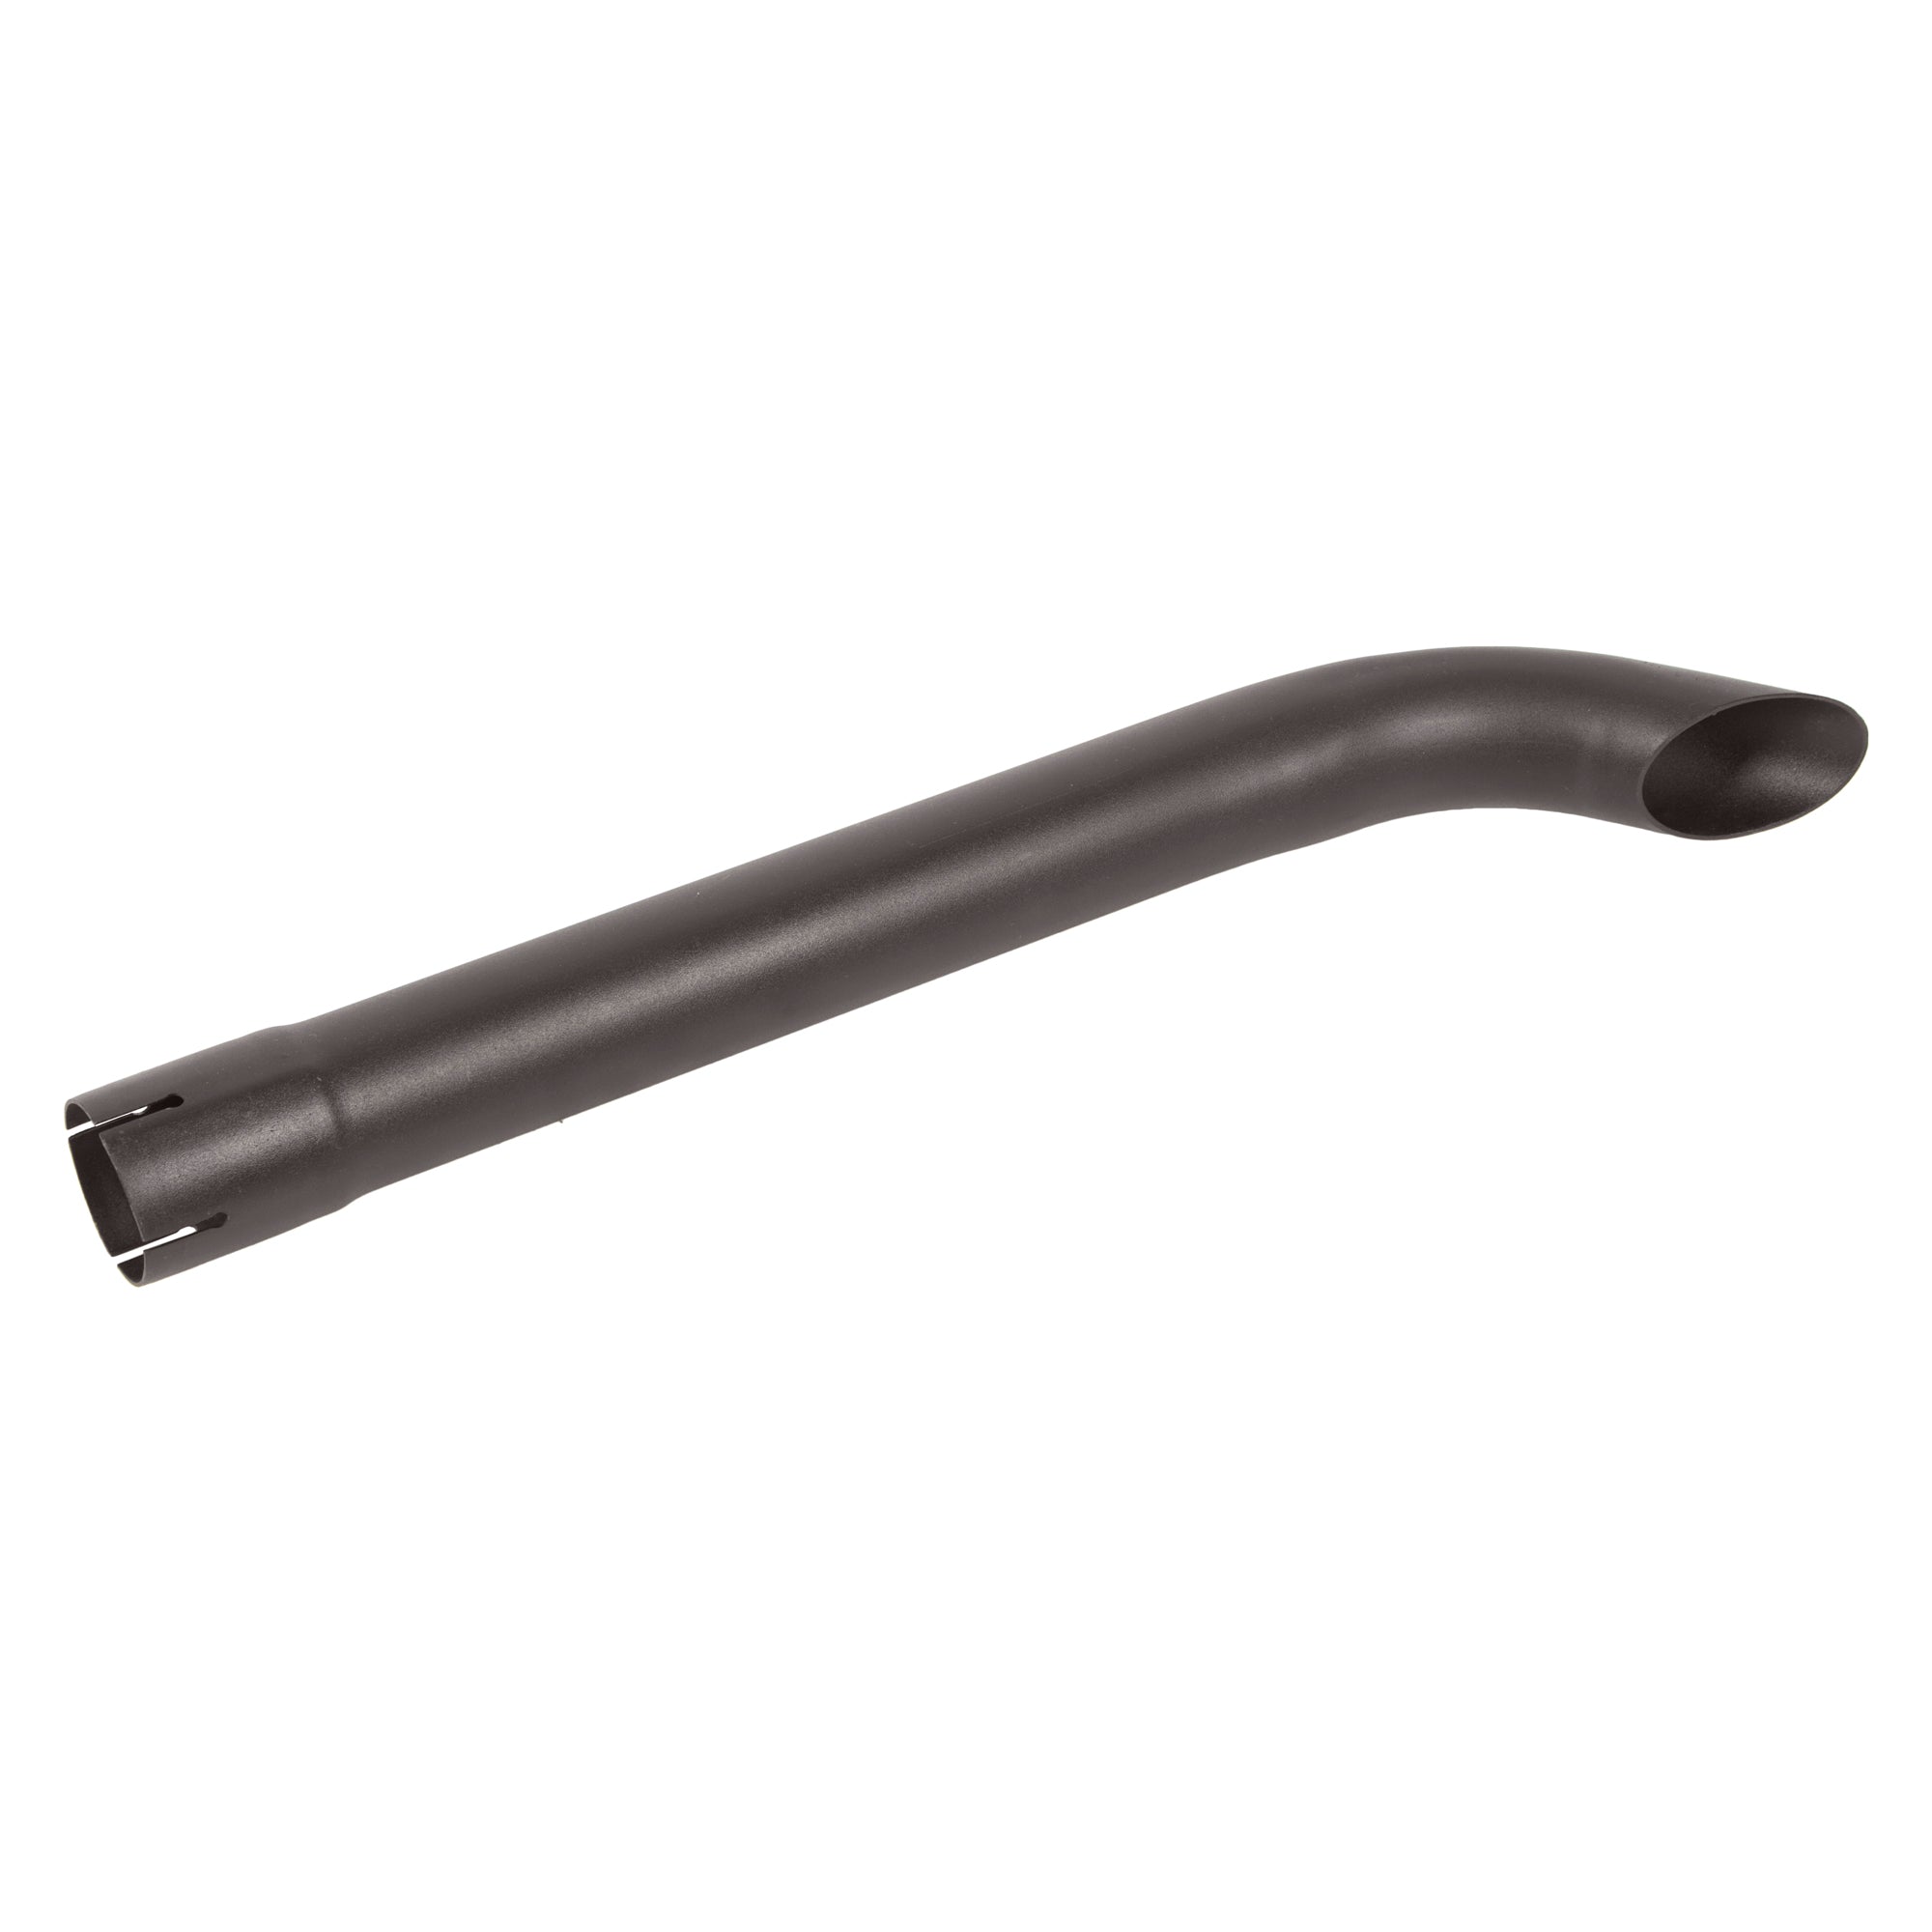 Exhaust End Pipe Stack Replacement UNIVERSAL - 2 -1/4" x 24" Curved Black